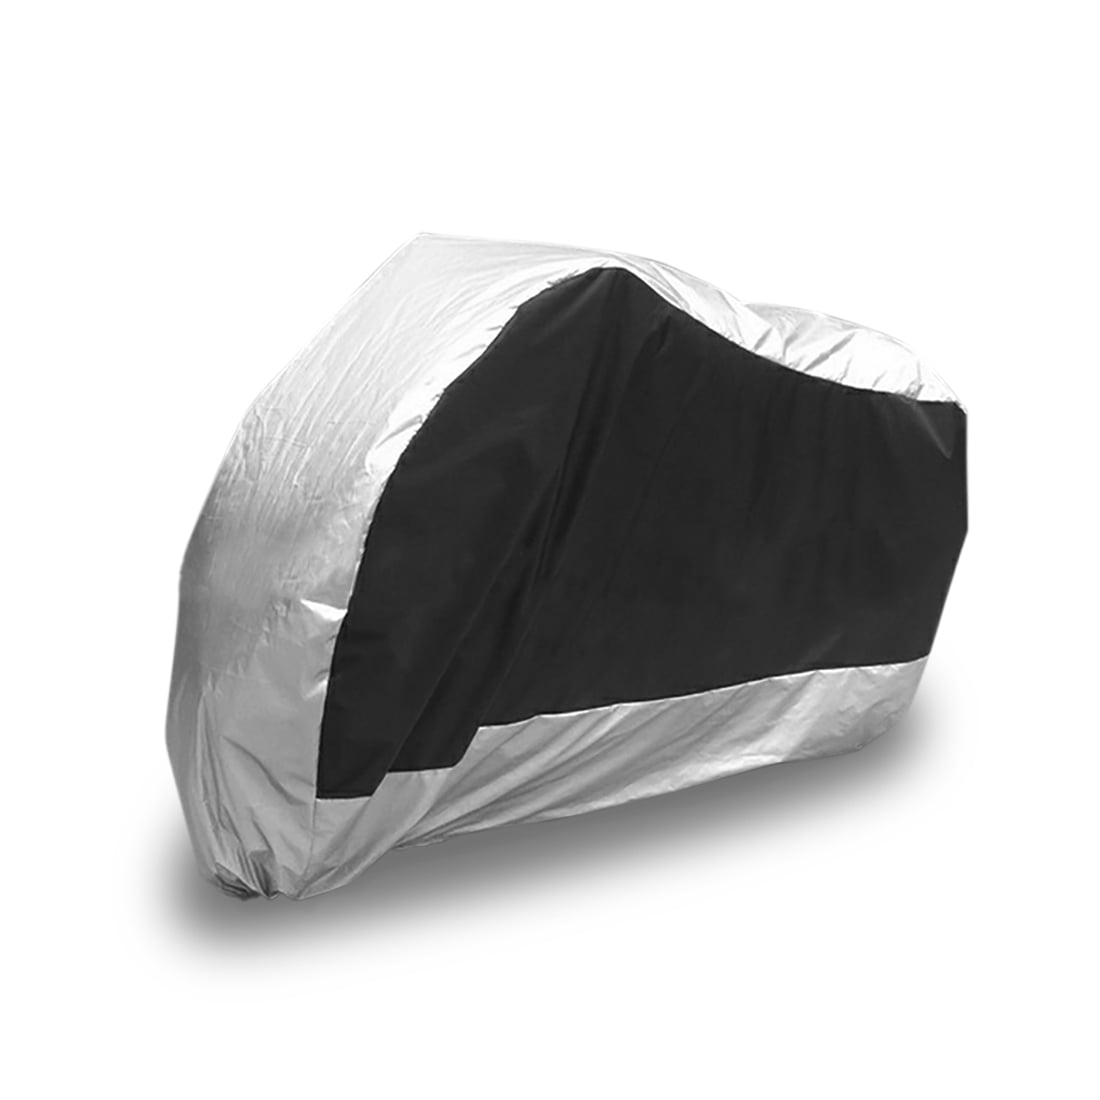 XL Motorcycle Cover Fit For Harley Davidson Sportster 1200 883 Custom XL1200C US 